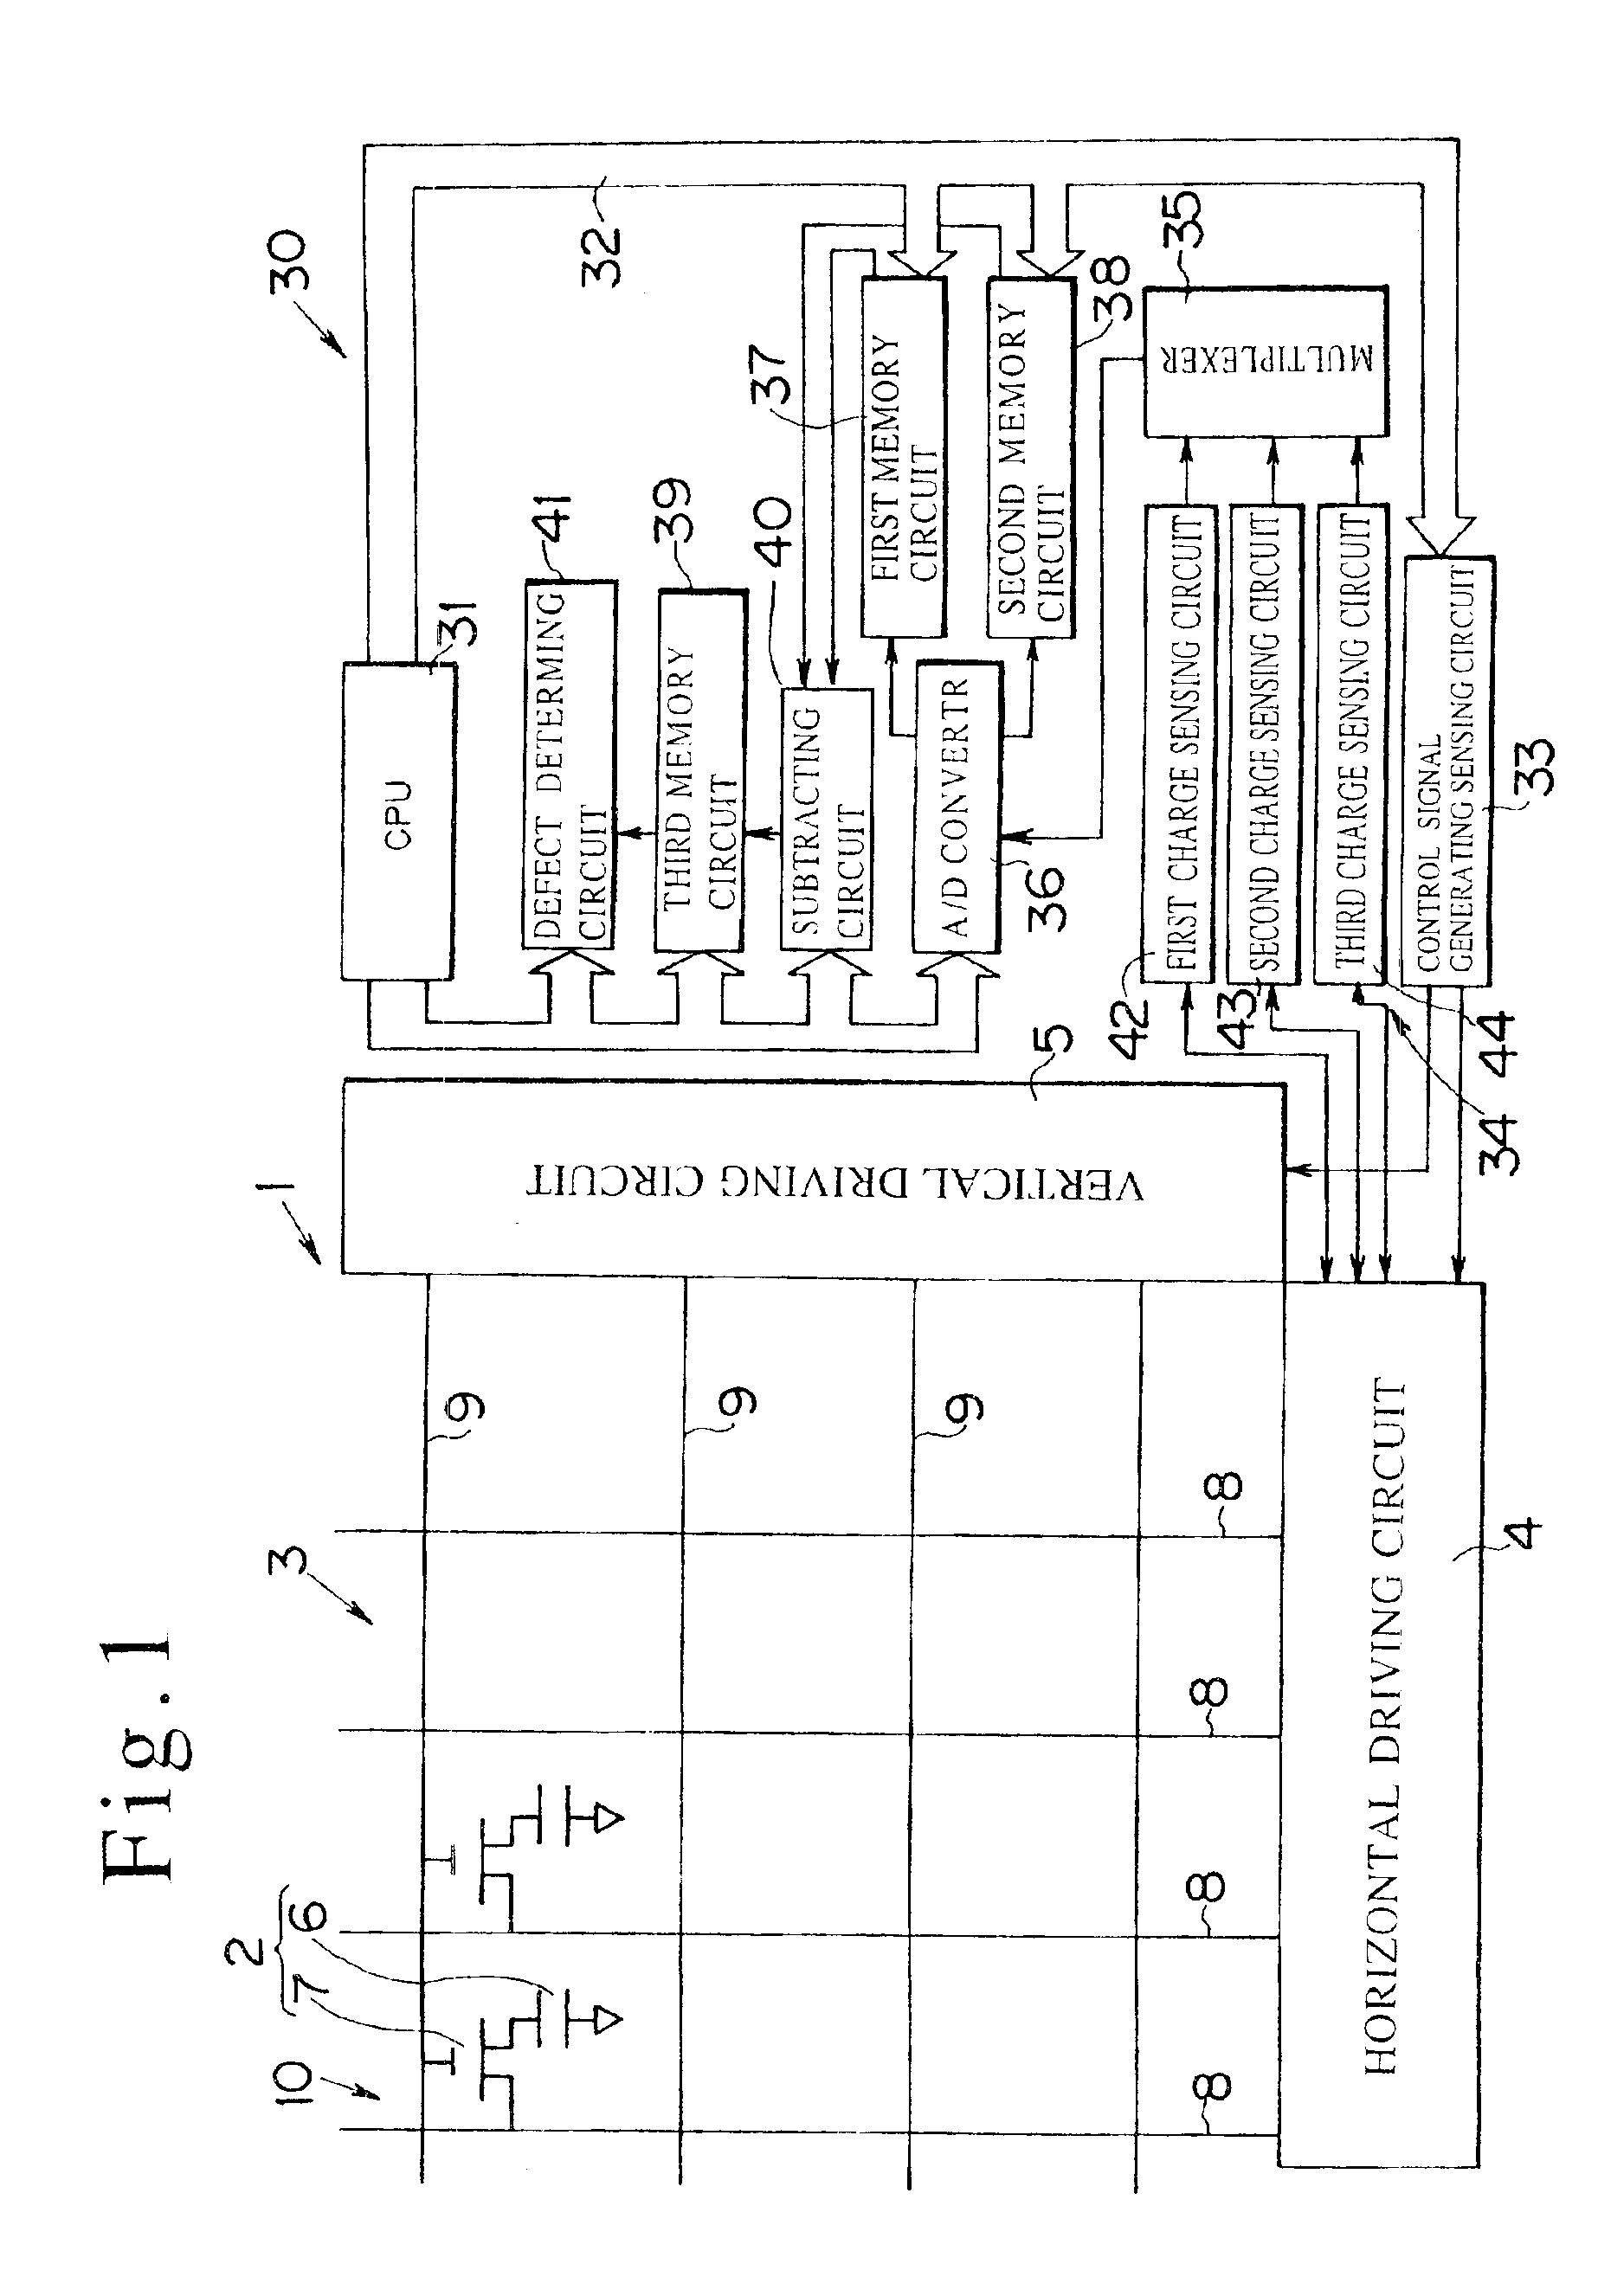 Apparatus and method for inspecting picture elements of an active matrix type display board